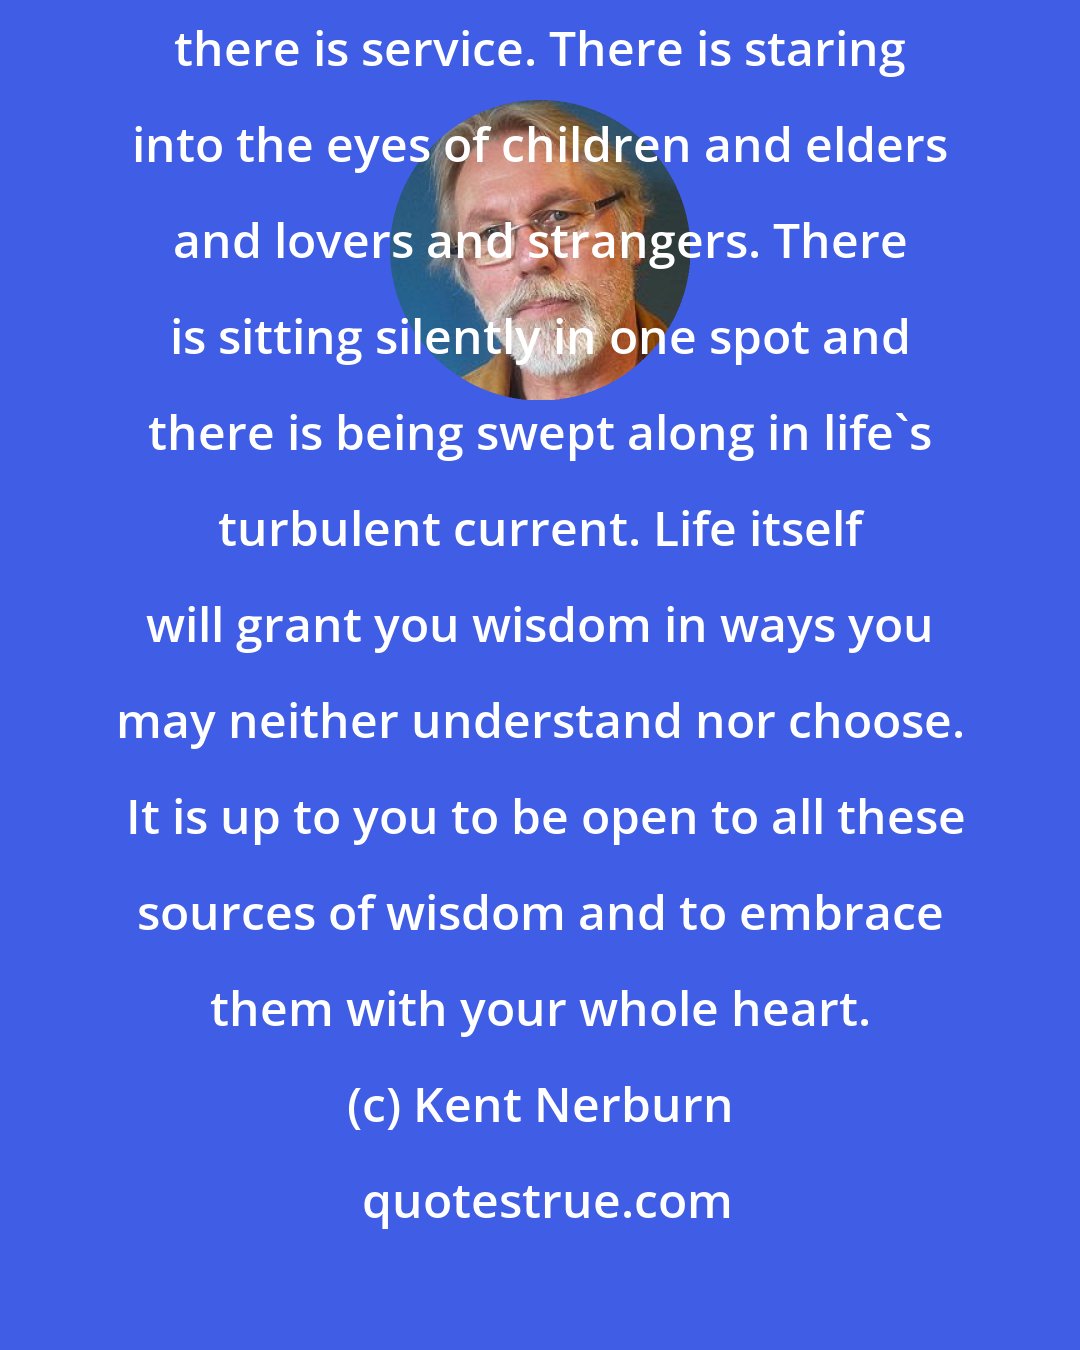 Kent Nerburn: There are many ways to seek wisdom. There is travel, there are masters, there is service. There is staring into the eyes of children and elders and lovers and strangers. There is sitting silently in one spot and there is being swept along in life's turbulent current. Life itself will grant you wisdom in ways you may neither understand nor choose.  It is up to you to be open to all these sources of wisdom and to embrace them with your whole heart.